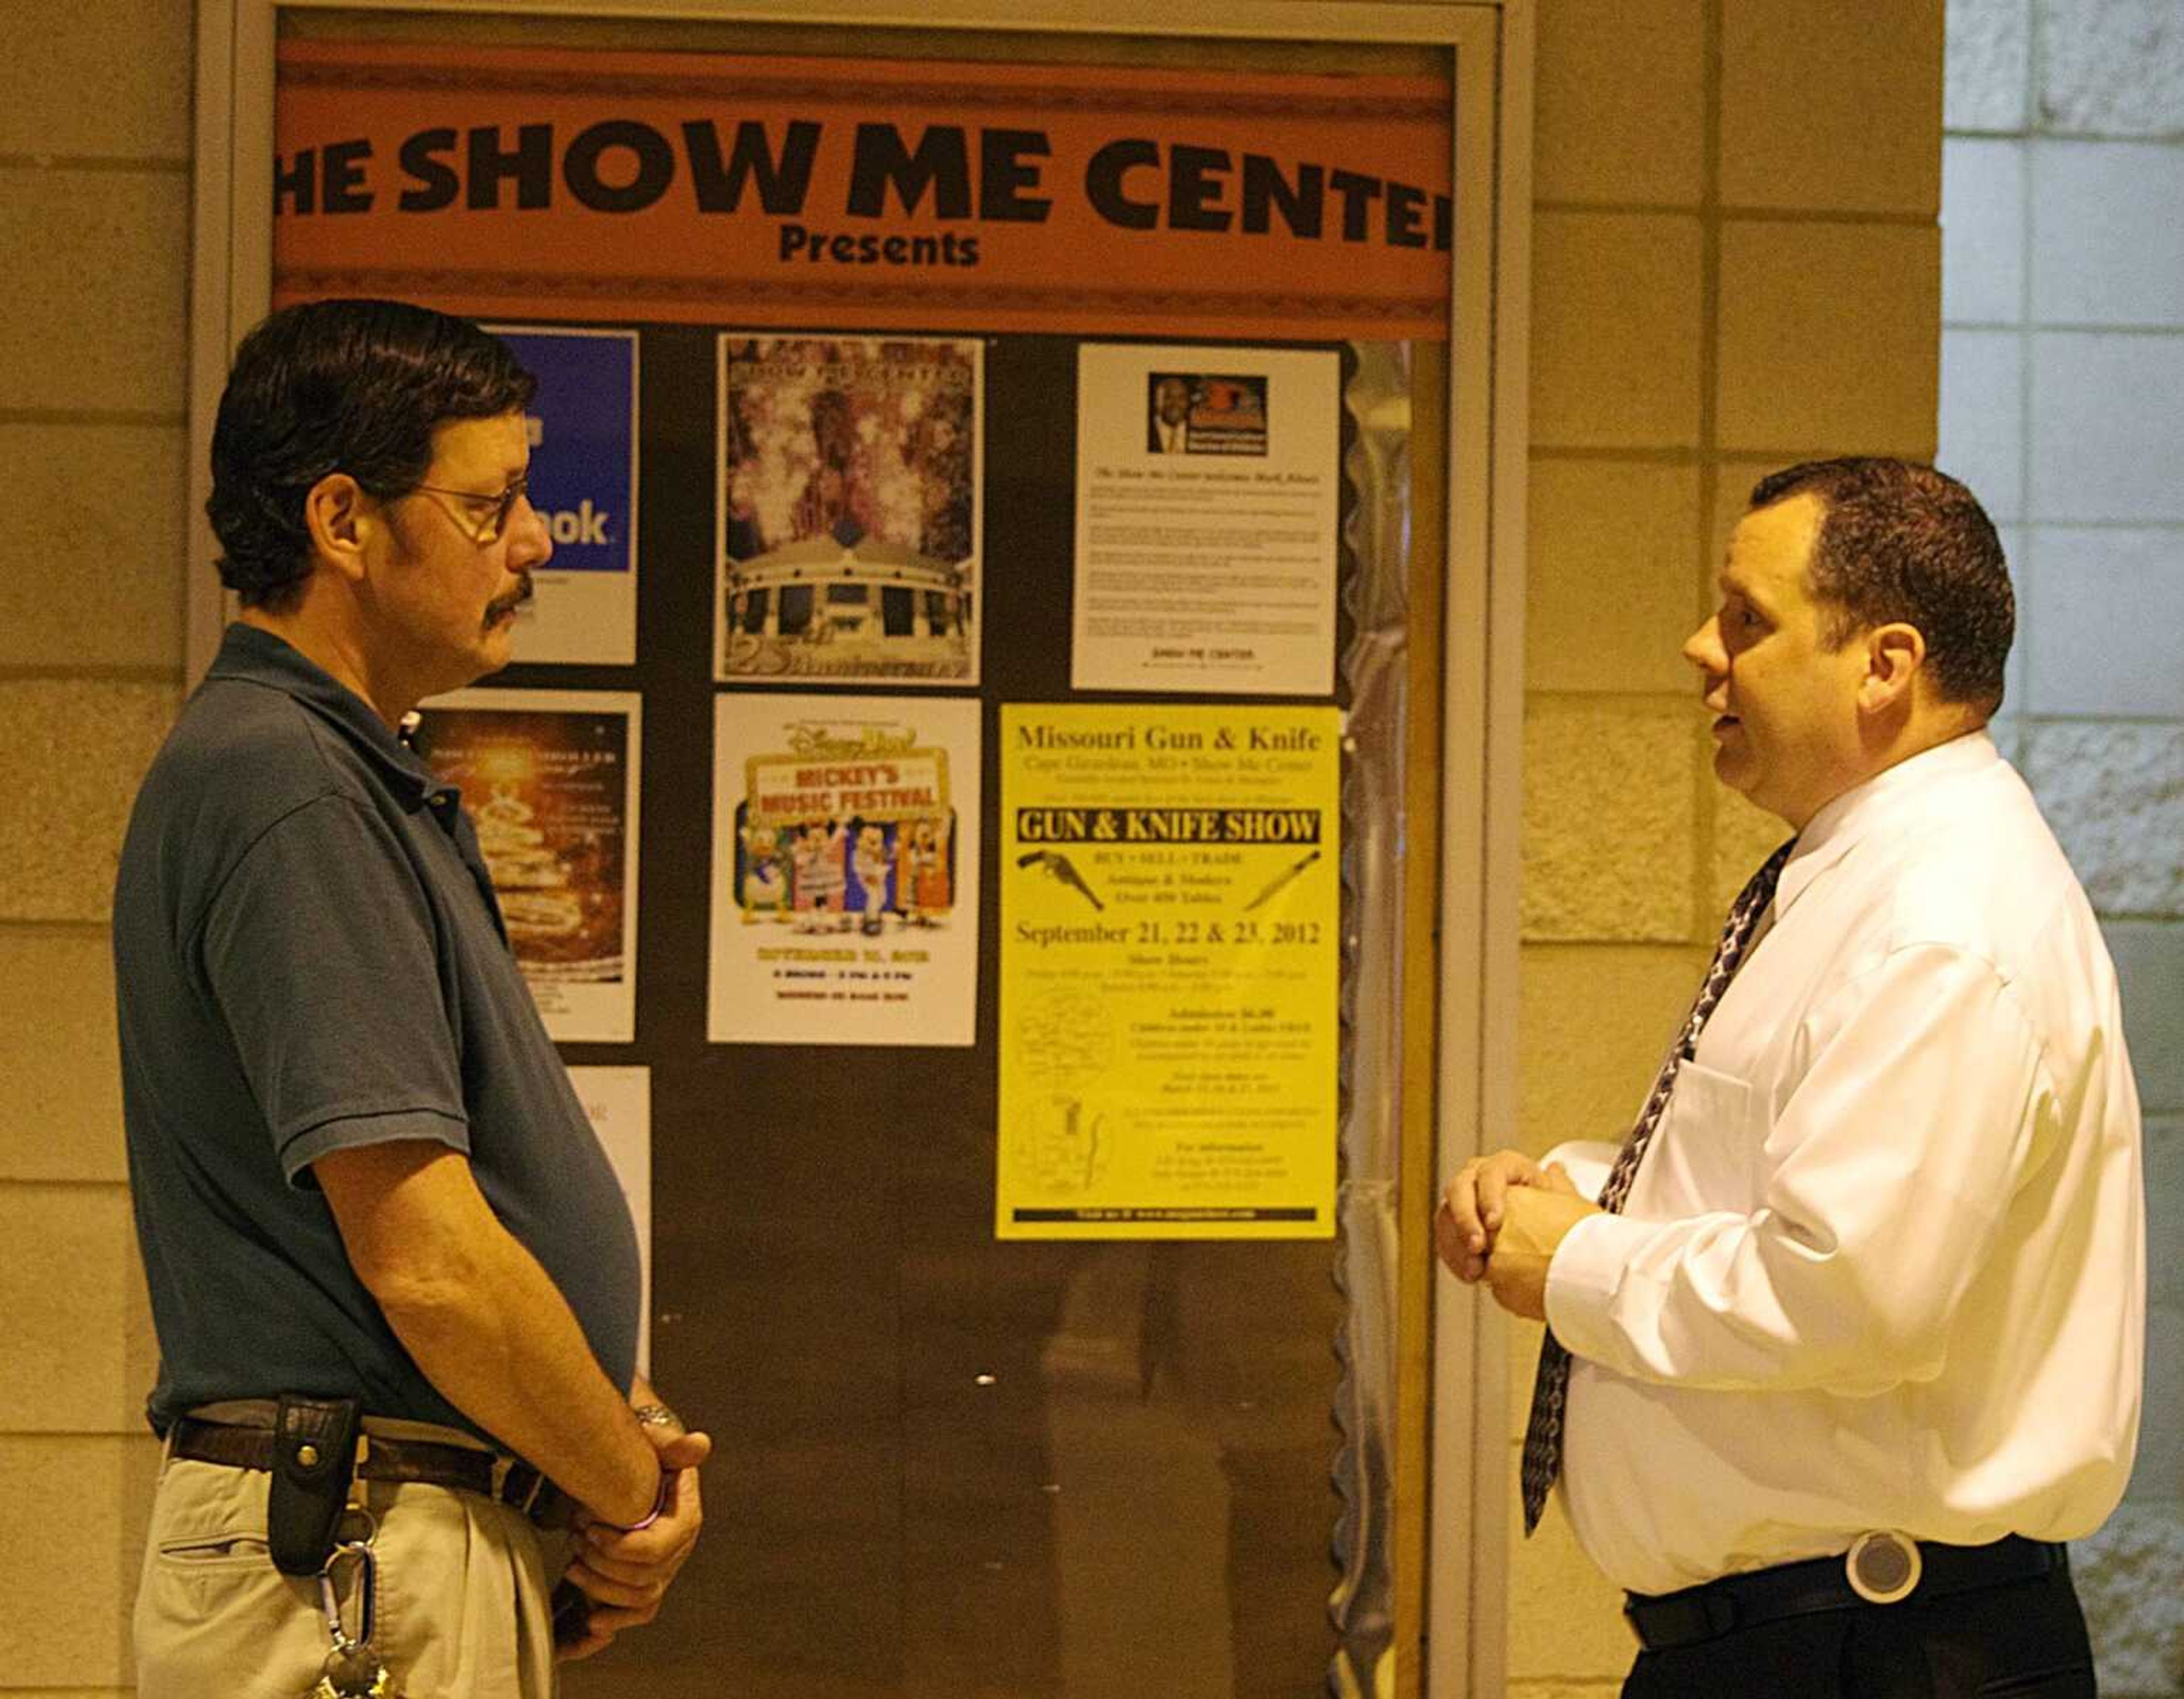 Wil Gorman, right, the new director at the Show Me Center, speaks with assistant director Jim Barbatti, left. Photo by Nathan Hamilton